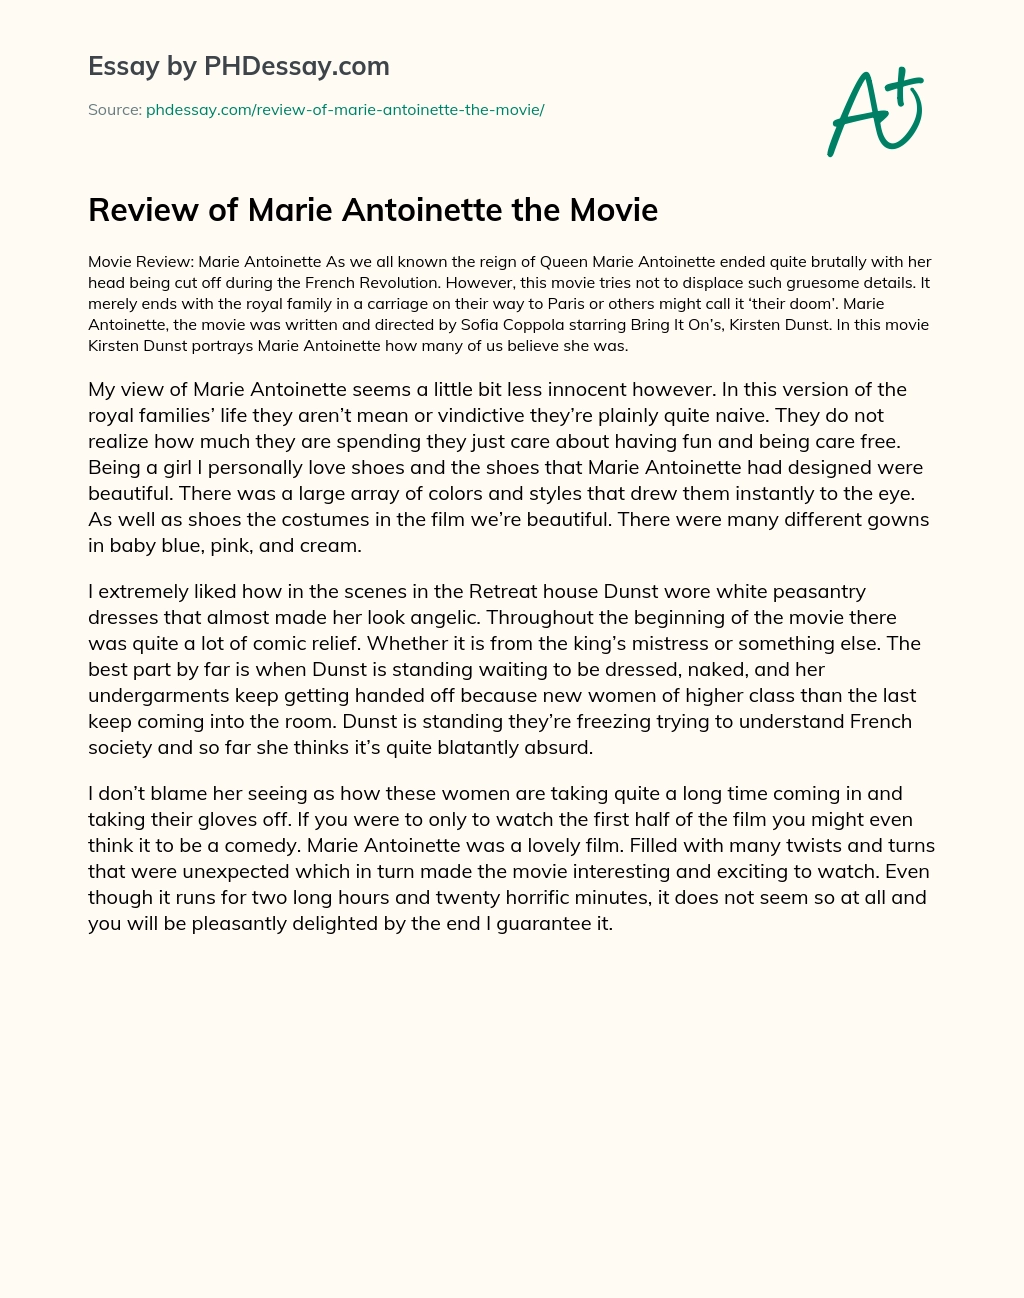 Review of Marie Antoinette the Movie essay